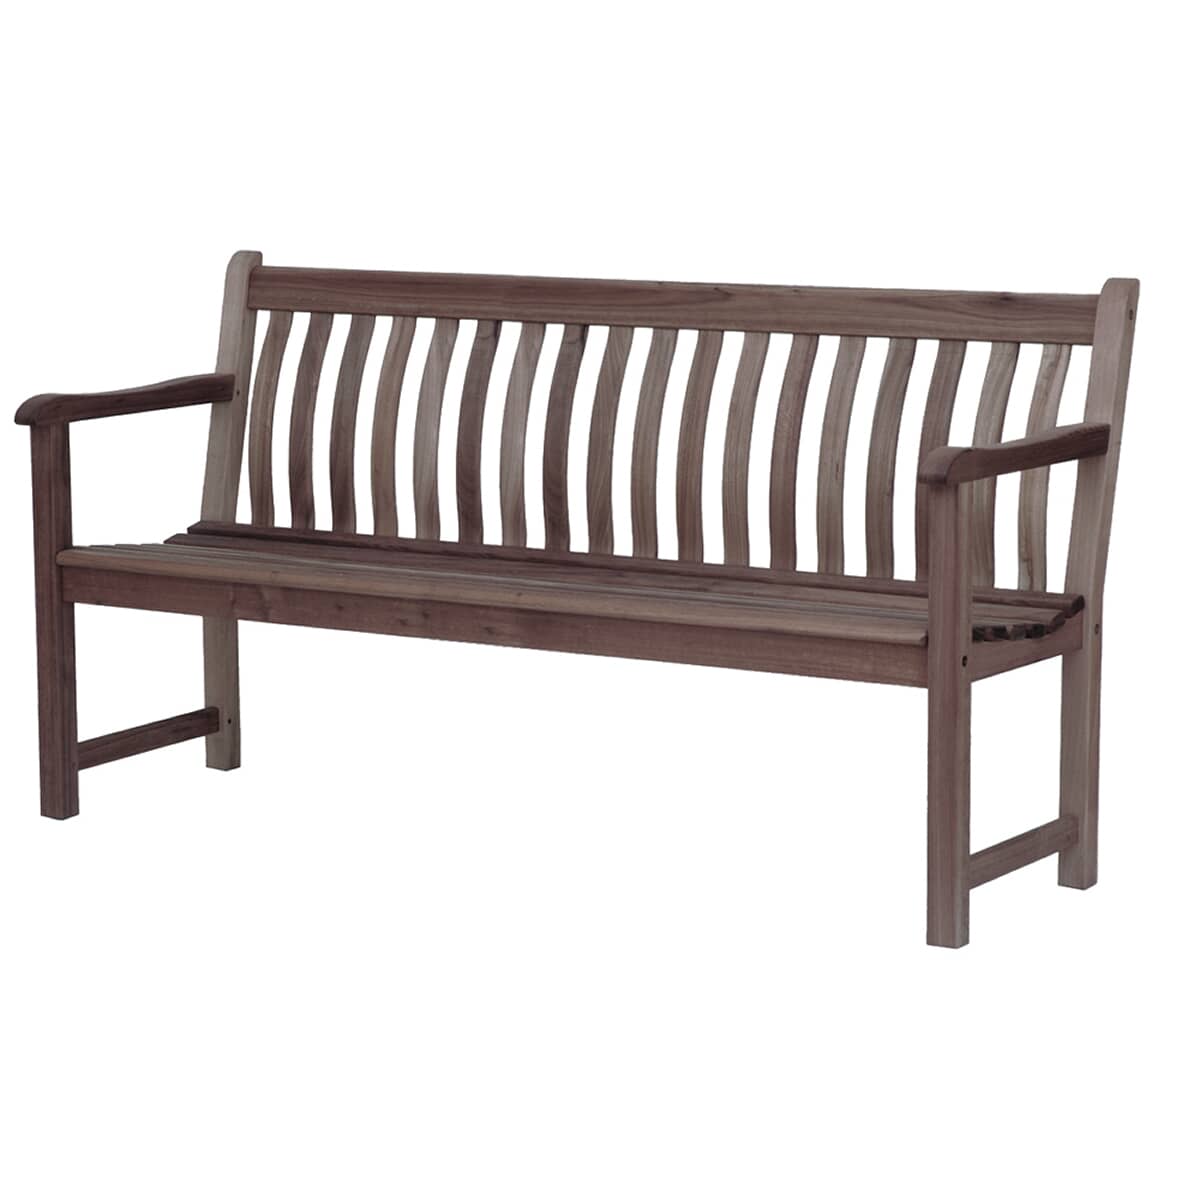 Alexander Rose Sherwood Painted Chestnut Acacia Broadfield Bench 6FT